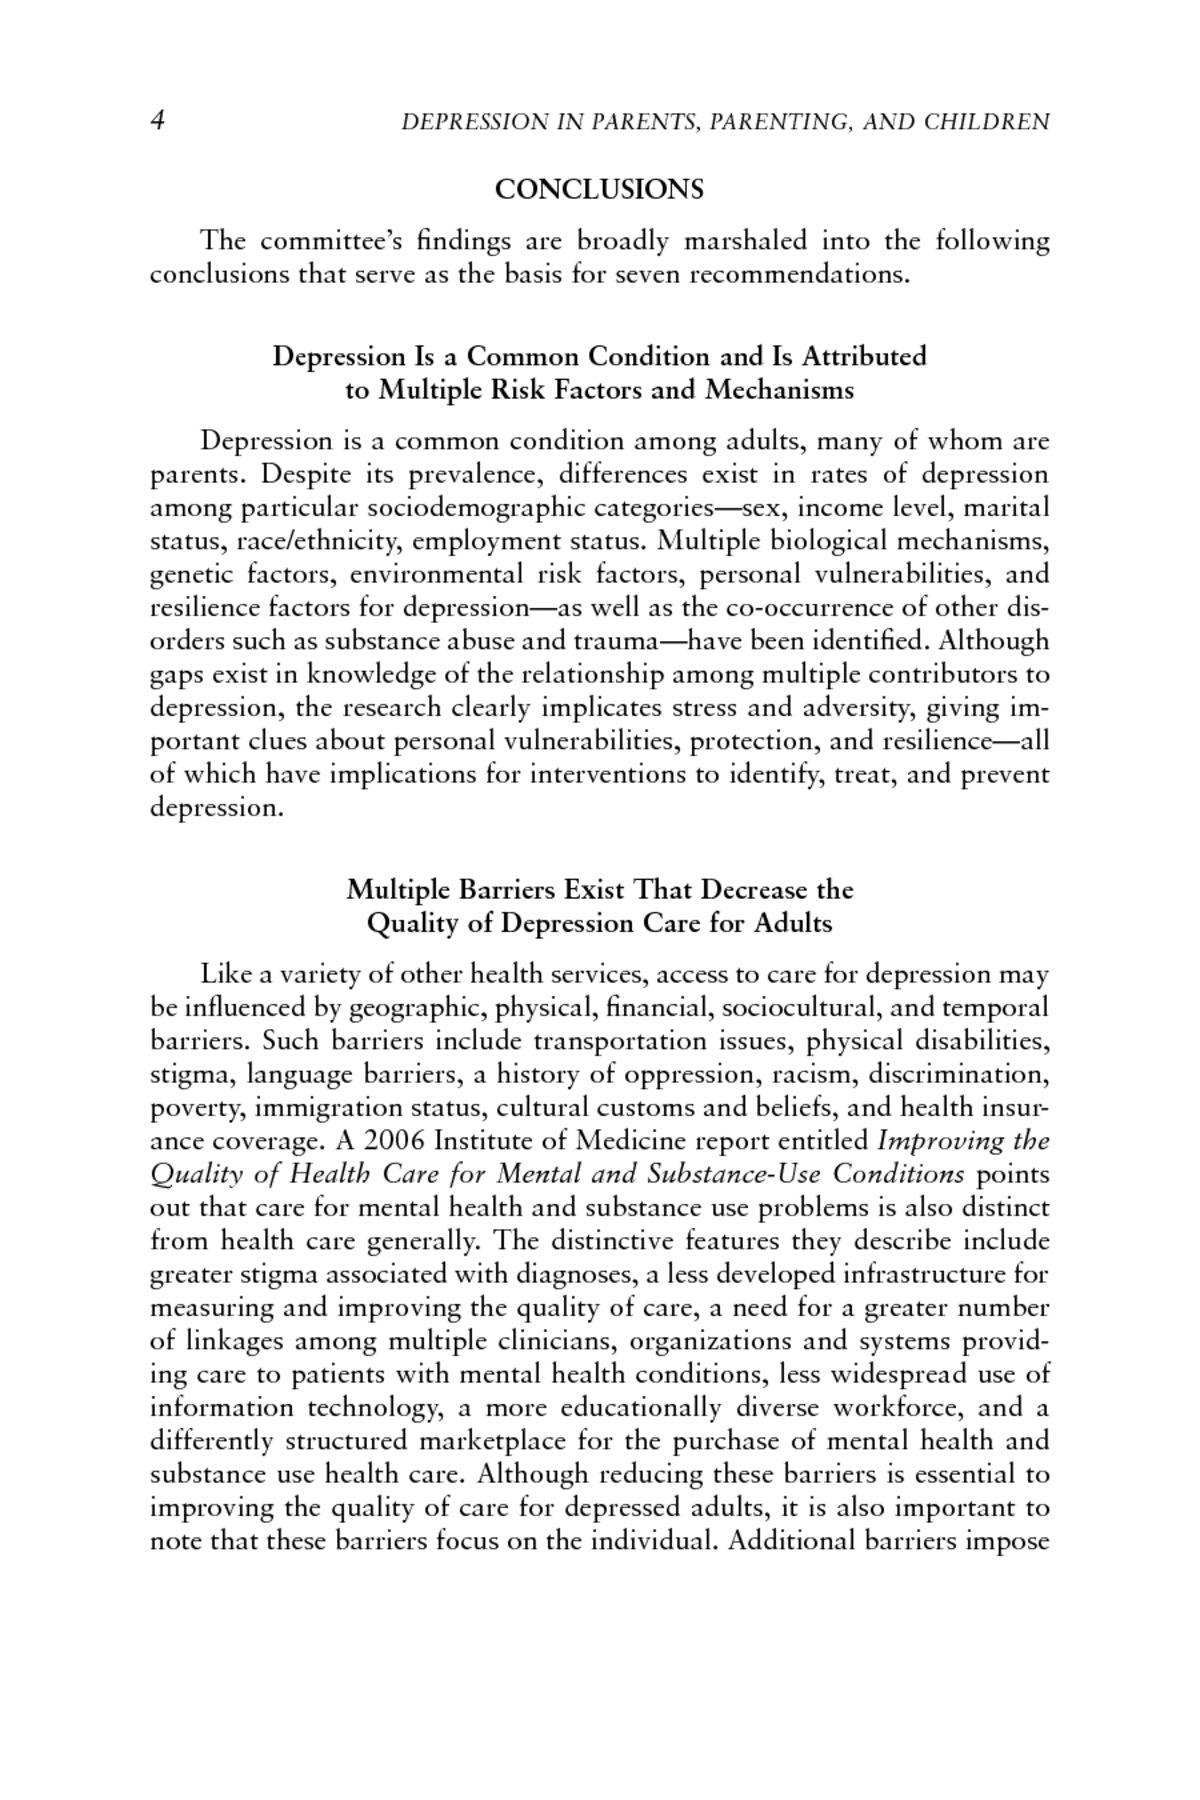 Research paper about depression